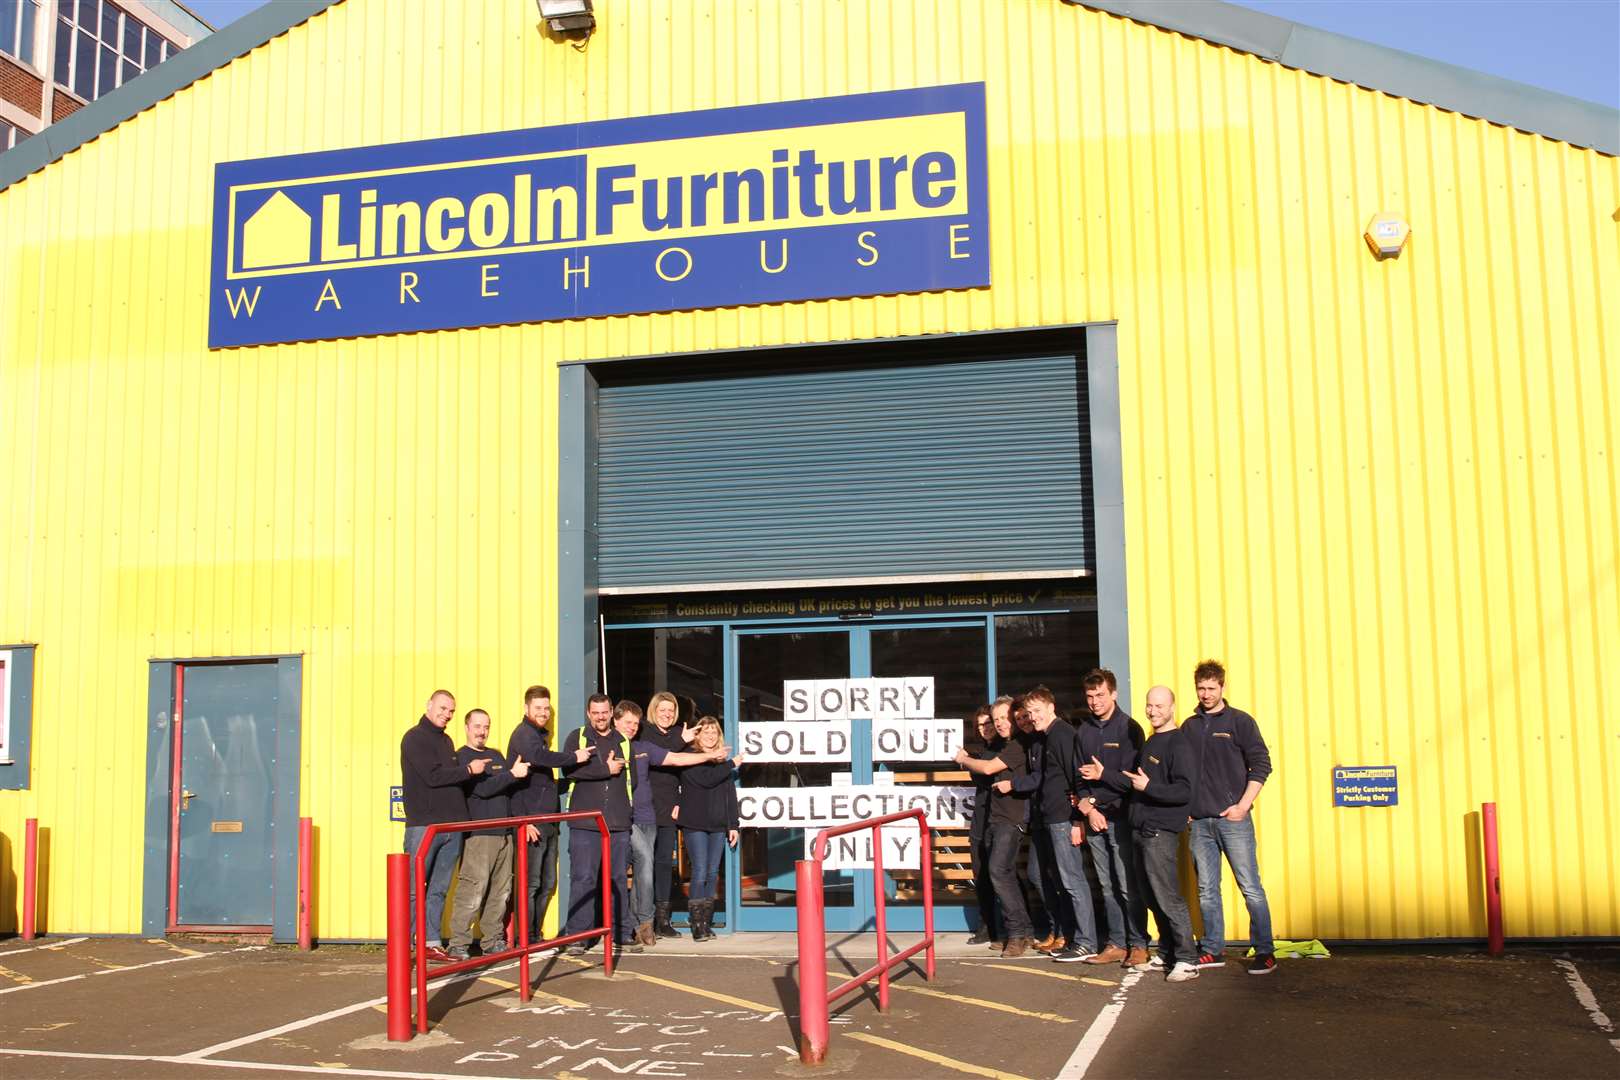 Lincoln Furniture Warehouse staff at the store as it closed after 16 years